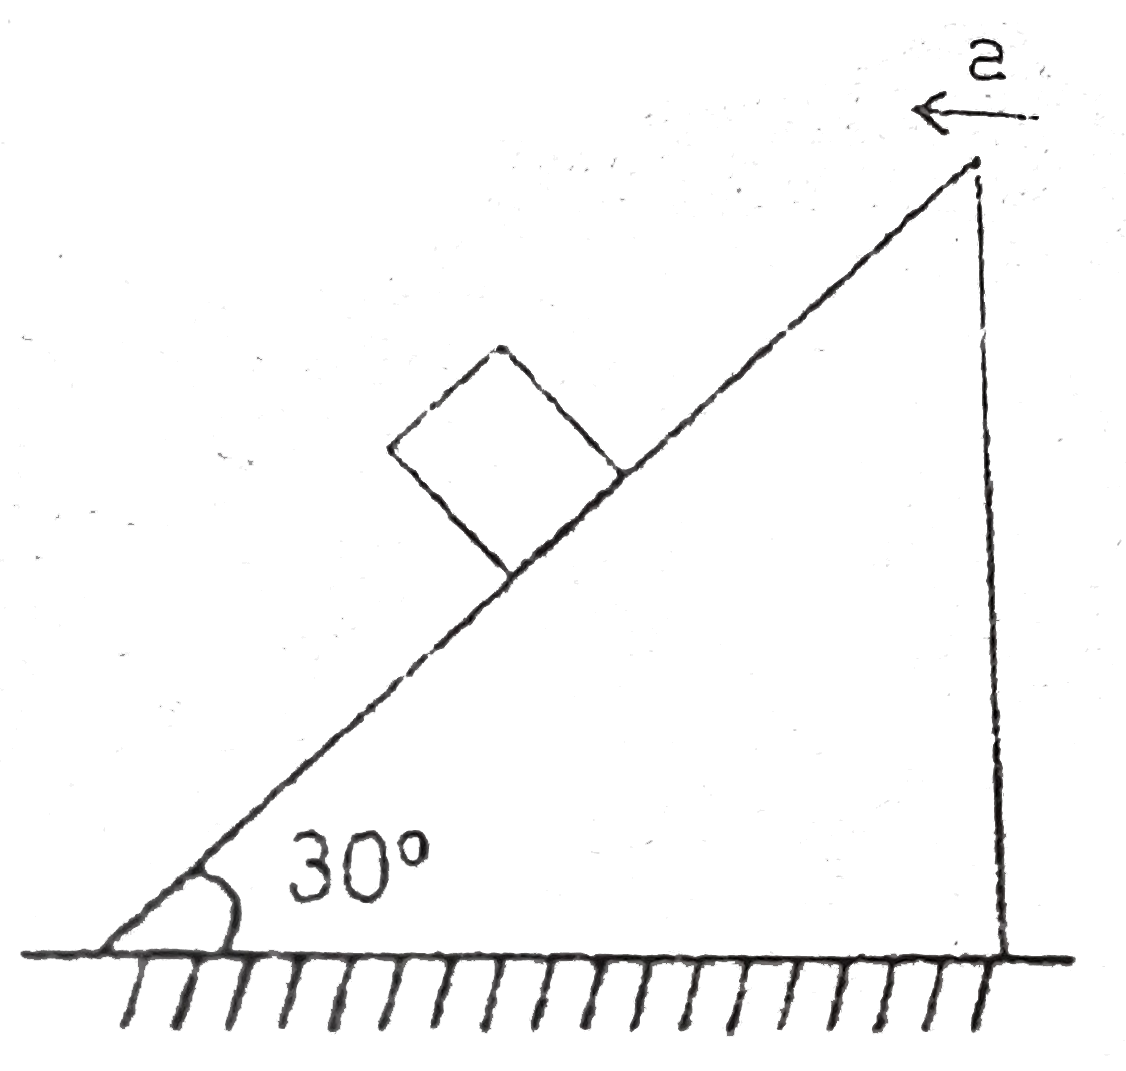 For no friction to act on a block kept on an accelerating wedge as shown in figure, acceleration a of the wedge should be -